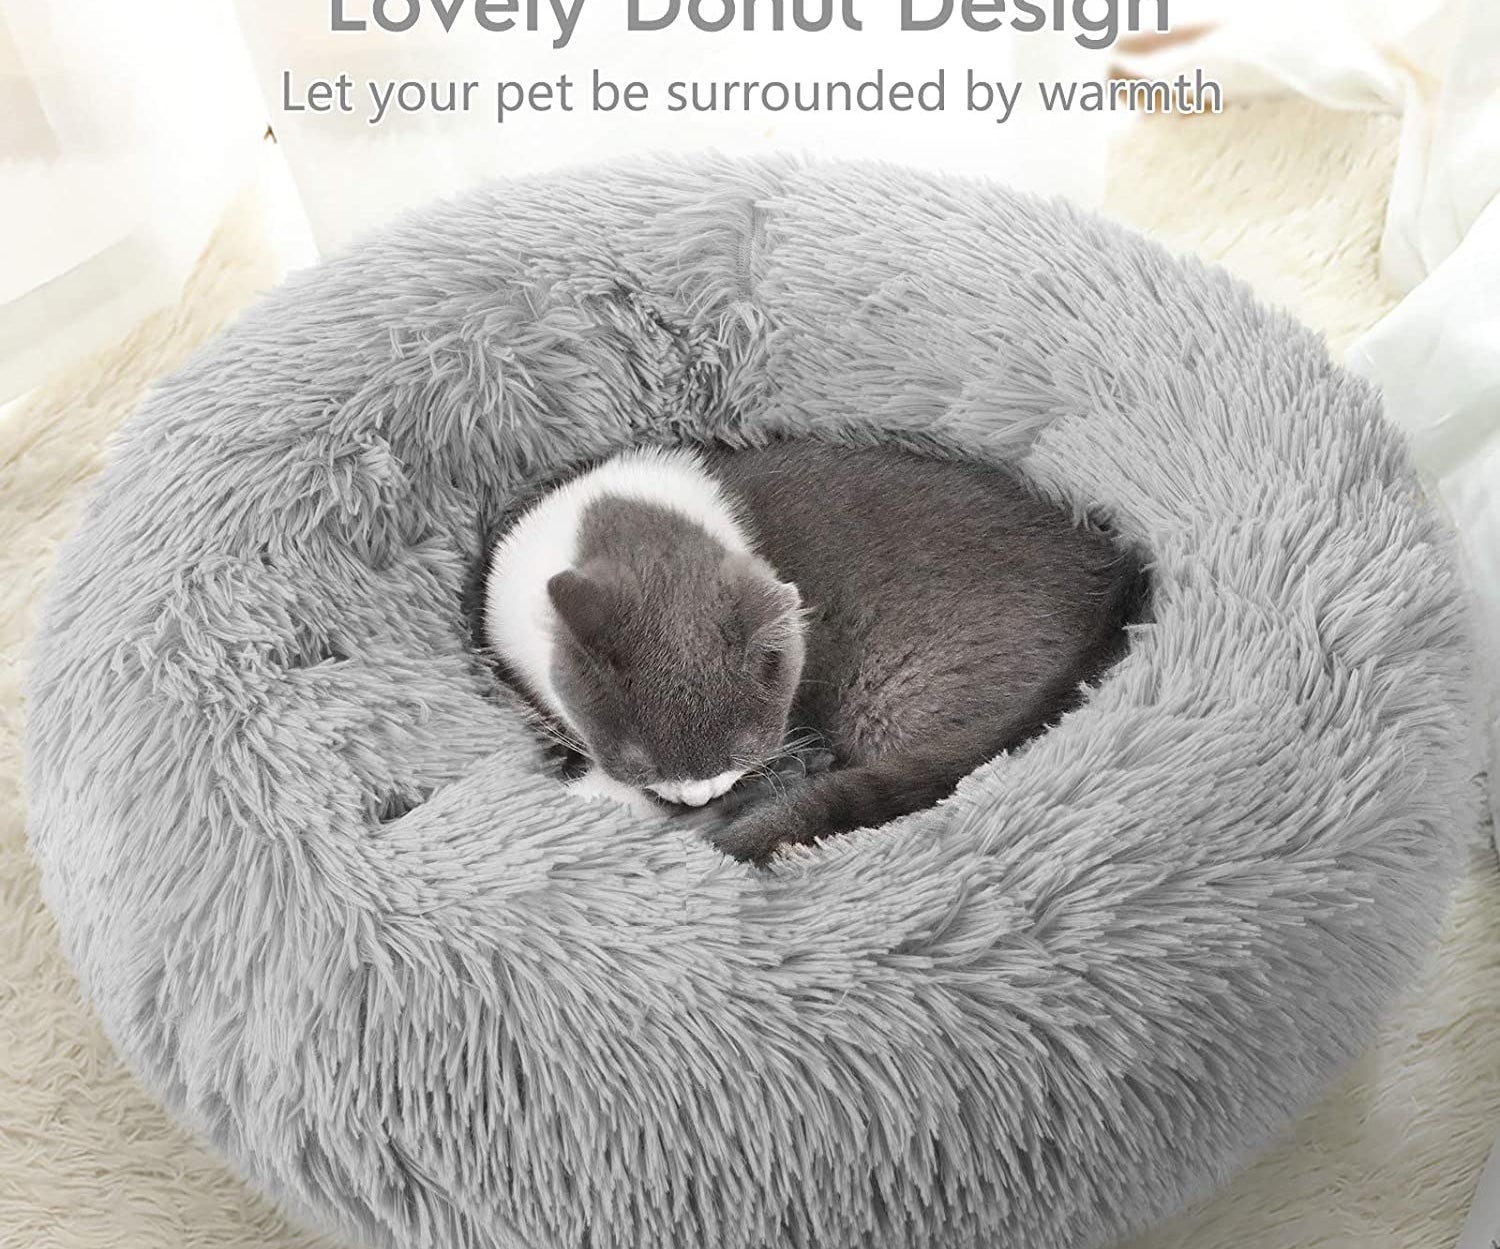 A tiny kitten curled up in the fluffy donut shaped bed